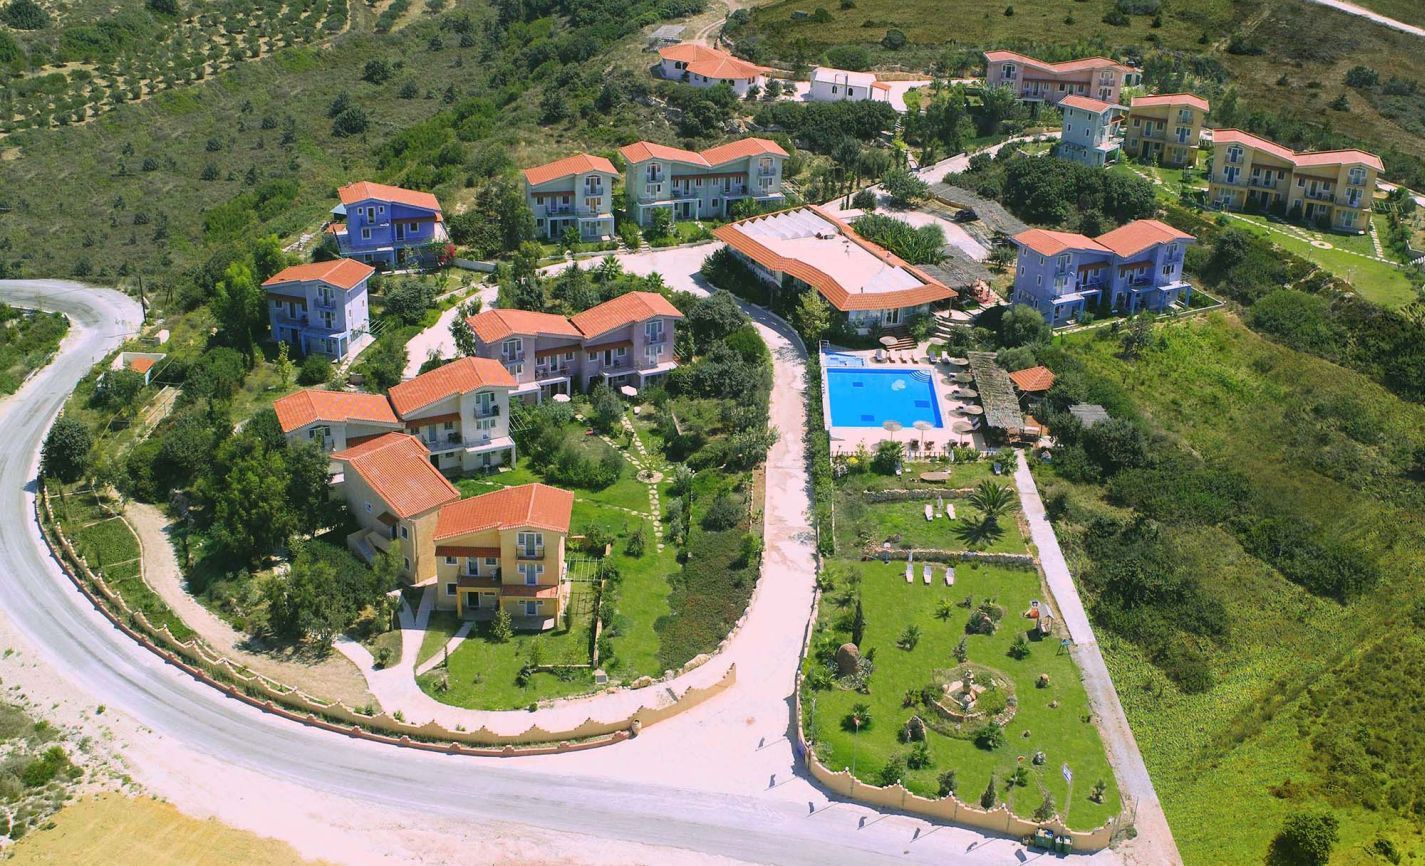 4* The Small Village - Κως ✦ -15% ✦ 2 Ημέρες (1 Διανυκτέρευση)